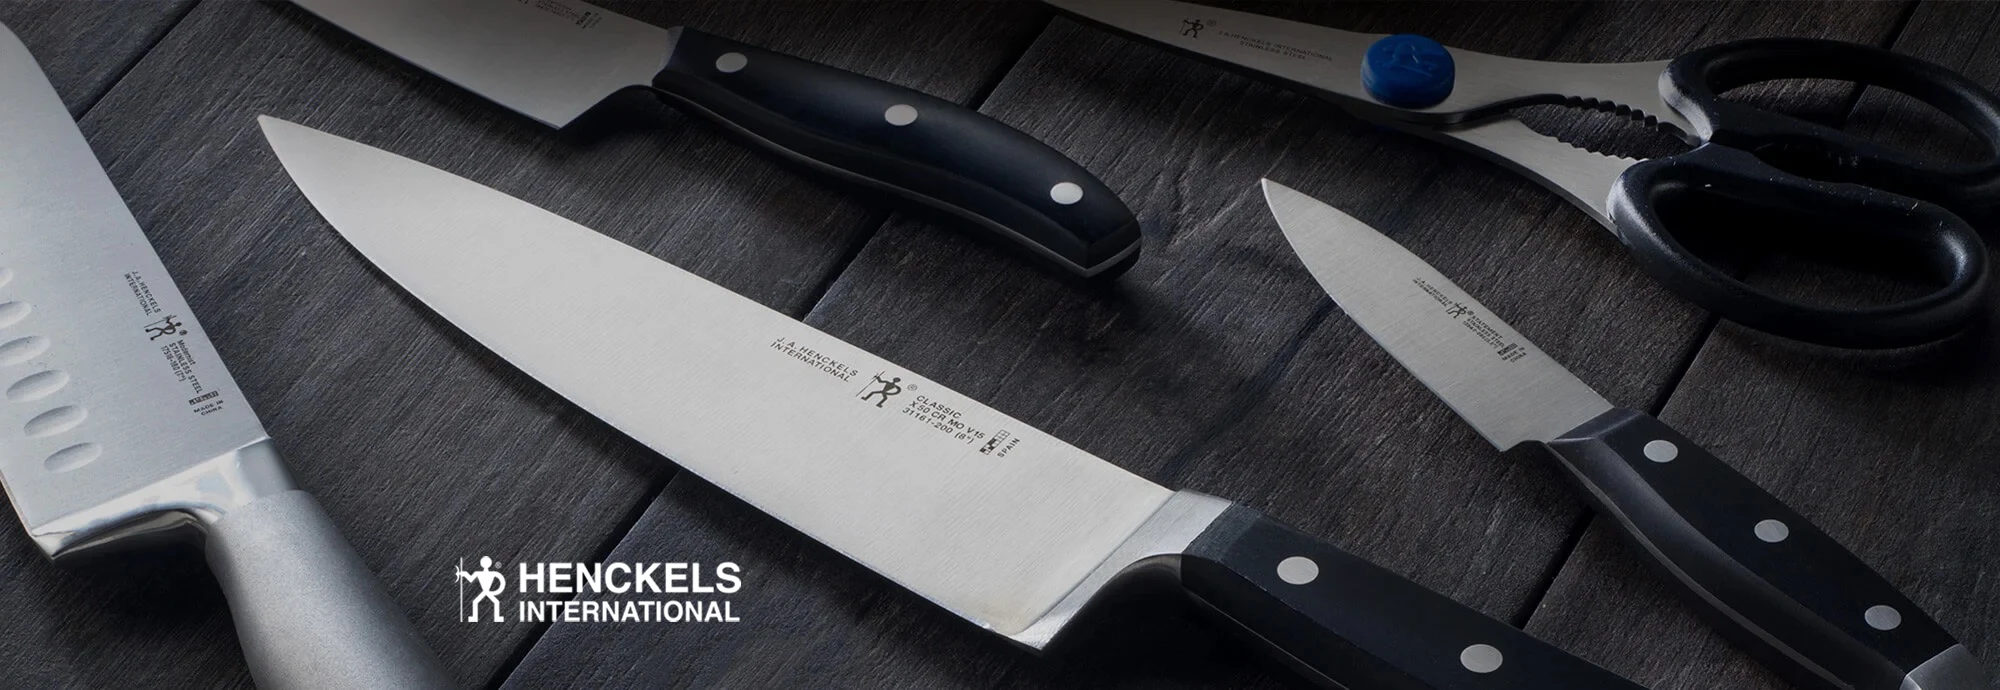 Henckels Knives and Cooking Tools